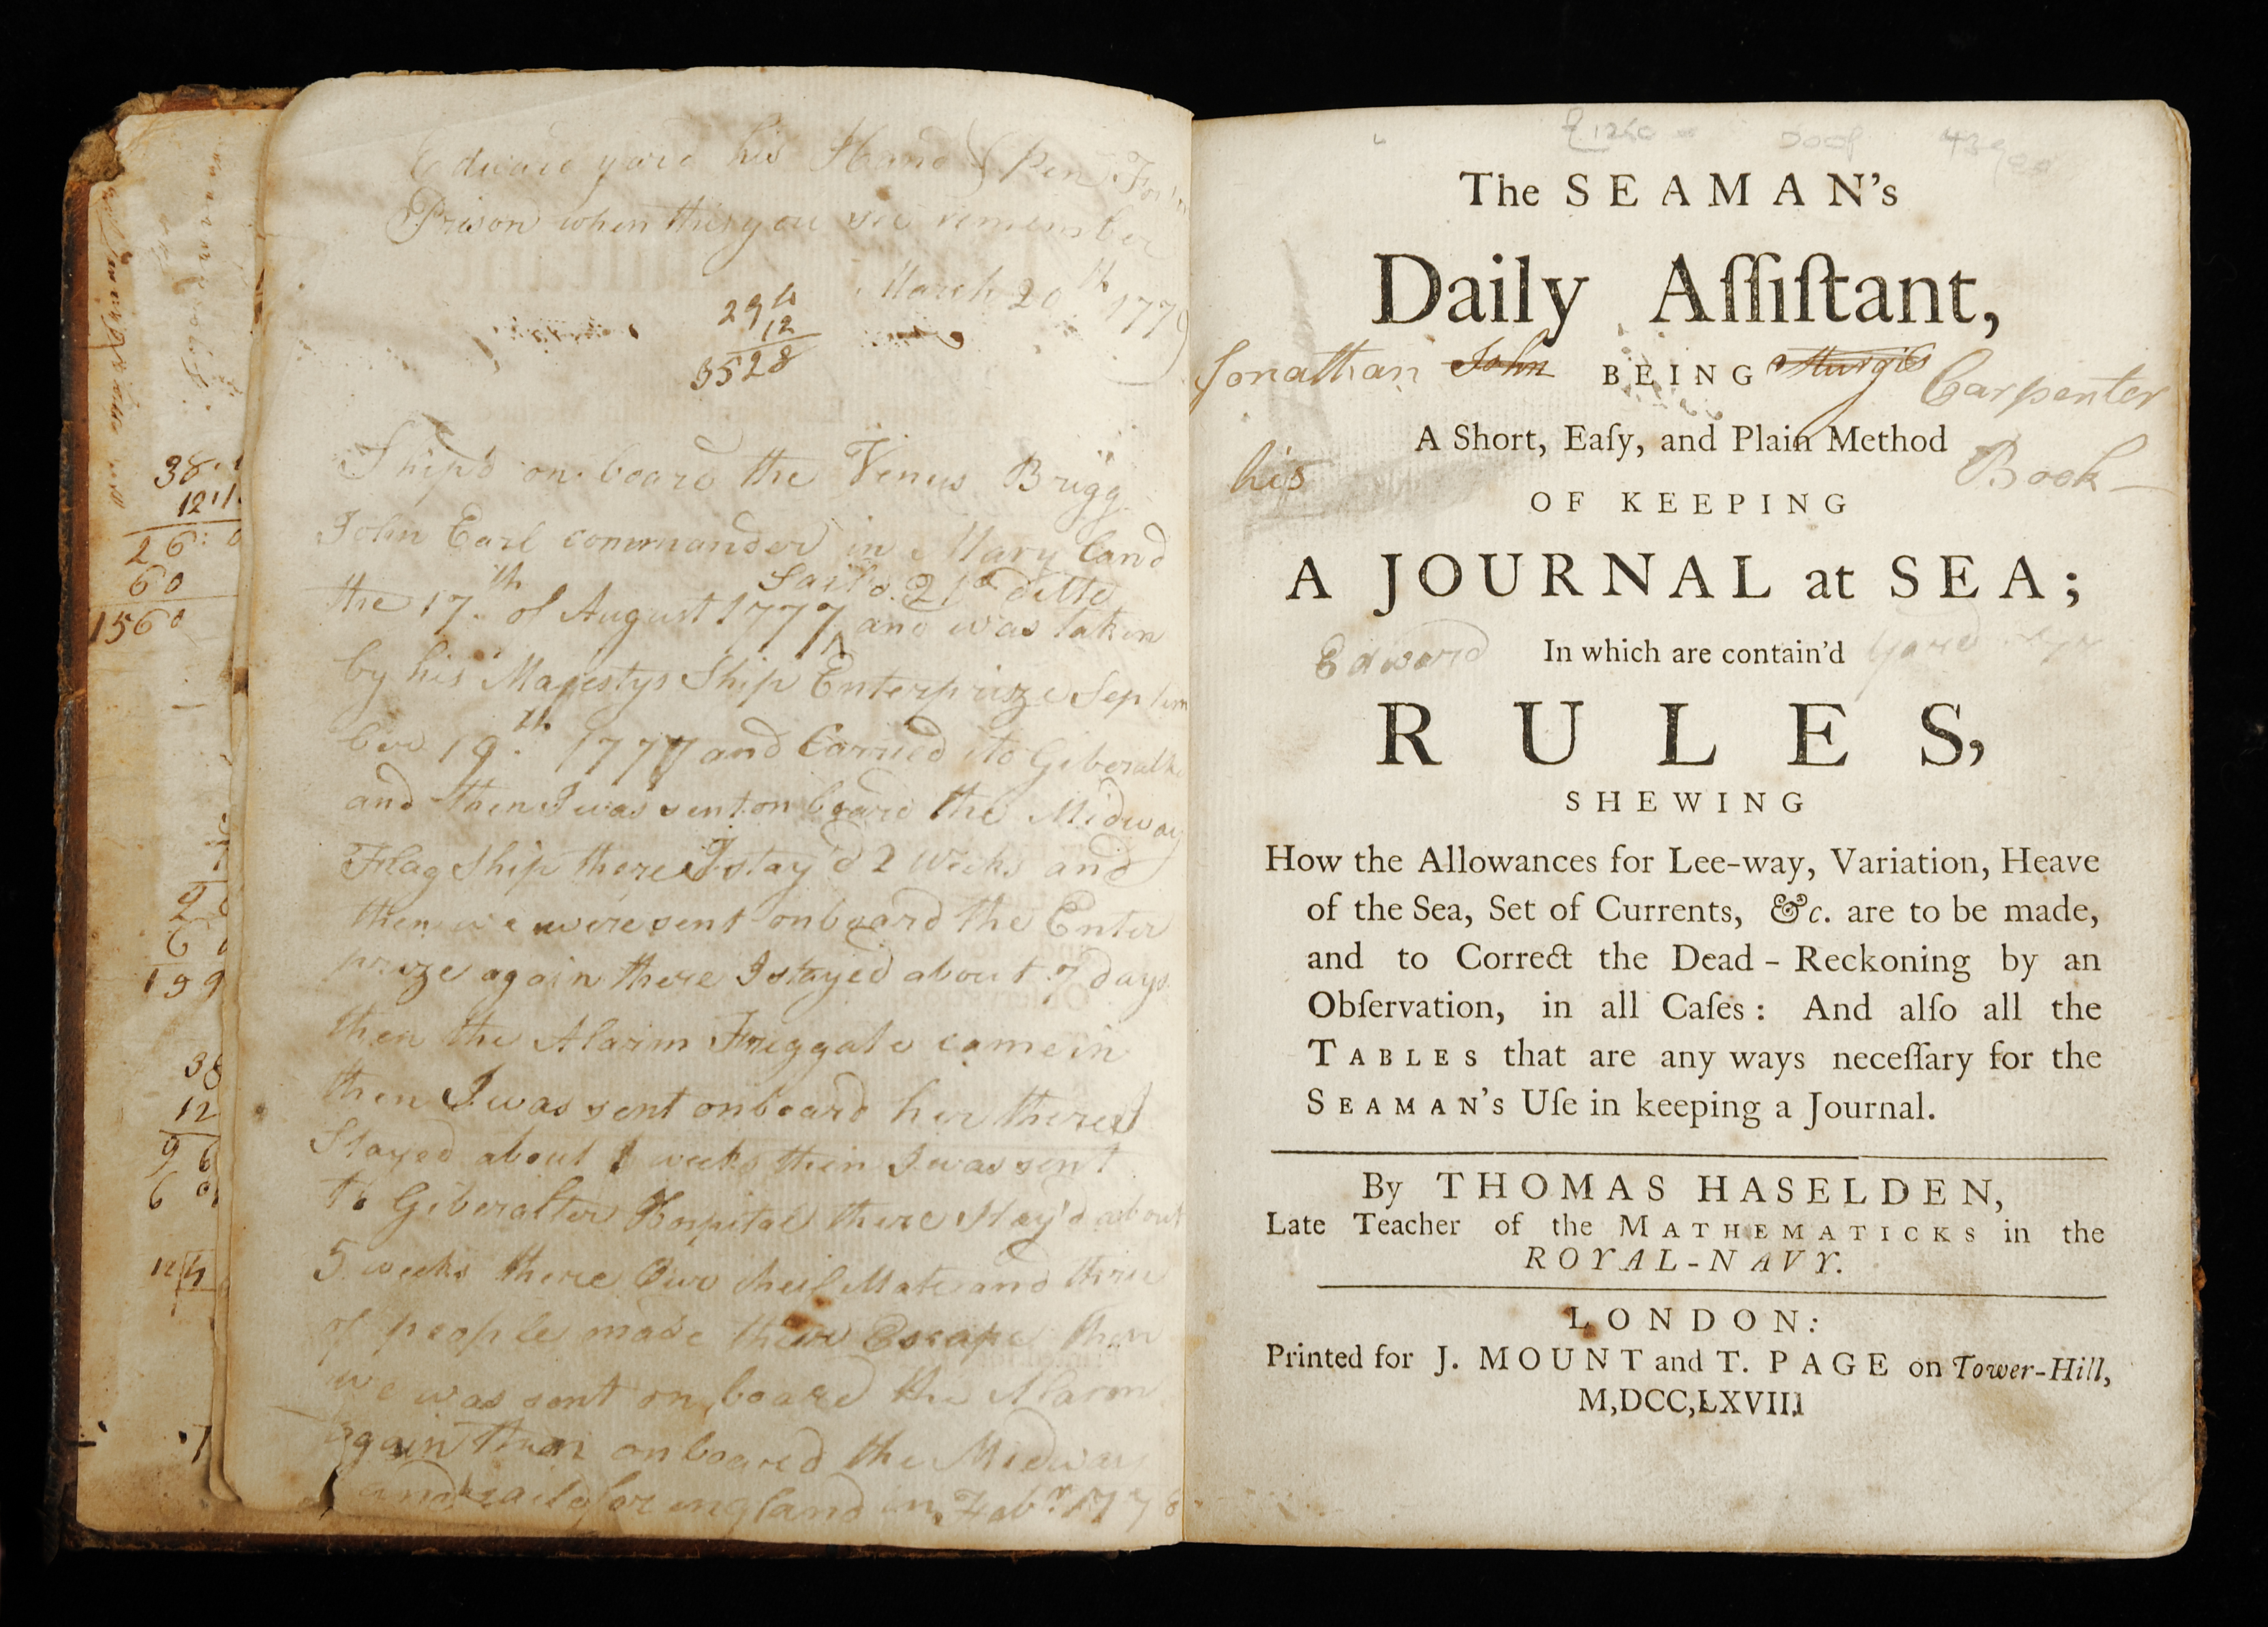 The Seaman’s Daily Assistant, being a Short, Easy, and Plain Method of Keeping a Journal at Sea, Thomas Haselden, London: Printed for J. Mount and T. Page, 1767